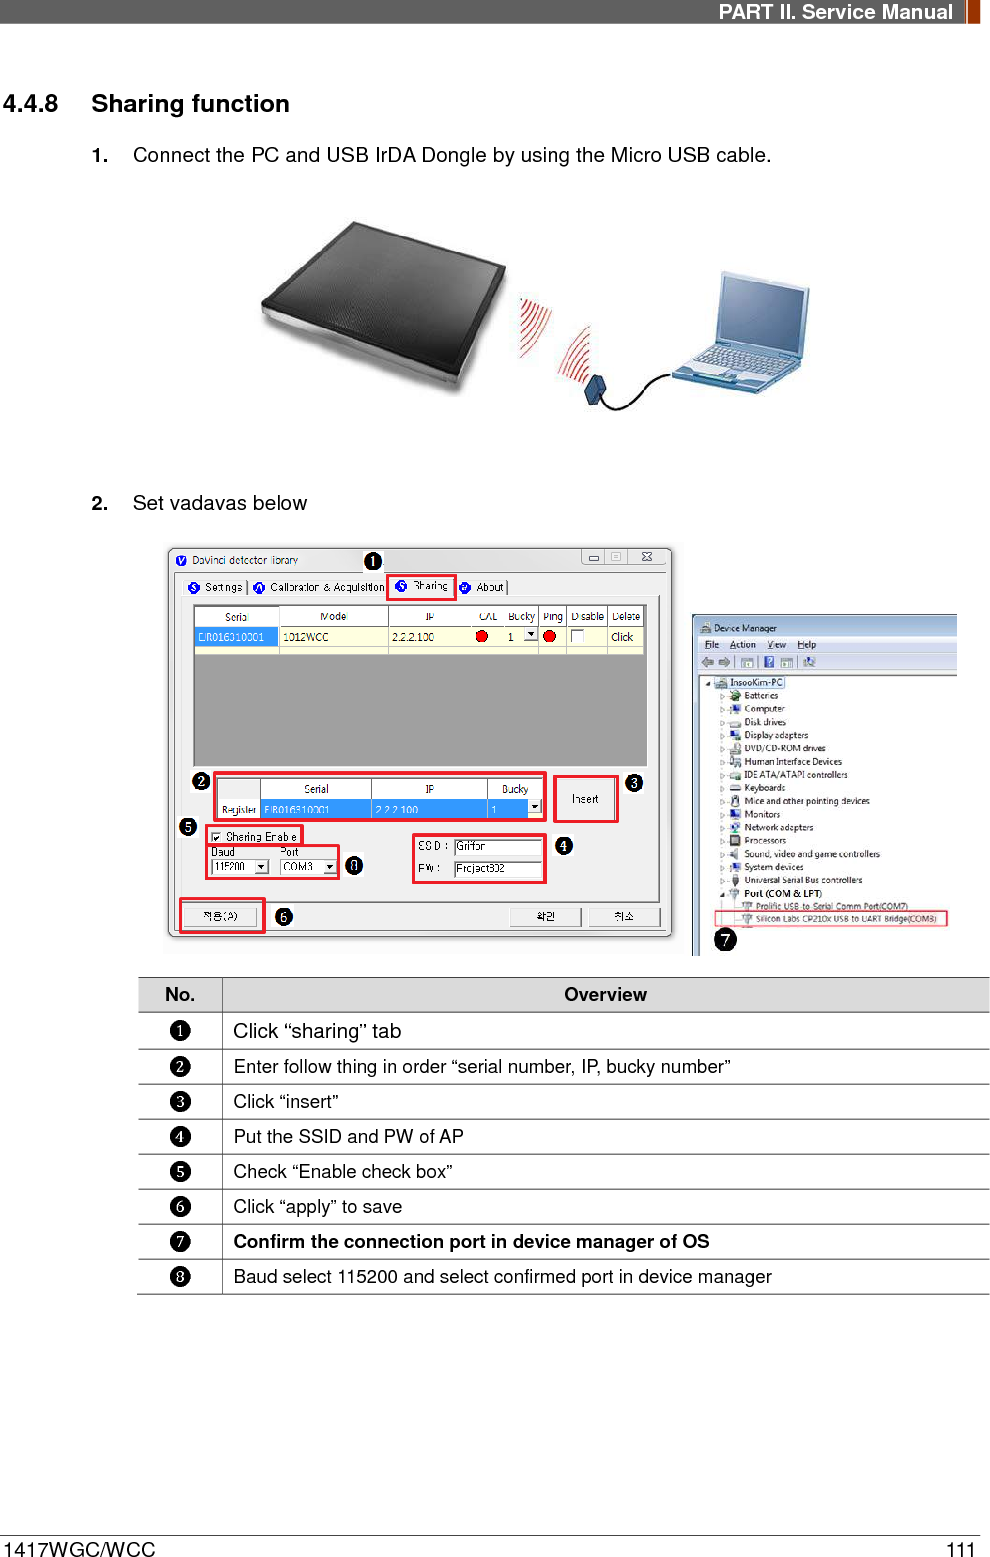 PART II. Service Manual  1417WGC/WCC 111 4.4.8 Sharing function 1. Connect the PC and USB IrDA Dongle by using the Micro USB cable.  2. Set vadavas below  No. Overview ❶ Click “sharing” tab ❷  Enter follow thing in order “serial number, IP, bucky number” ❸ Click “insert” ❹ Put the SSID and PW of AP ❺ Check “Enable check box” ❻ Click “apply” to save ❼ Confirm the connection port in device manager of OS ❽ Baud select 115200 and select confirmed port in device manager     